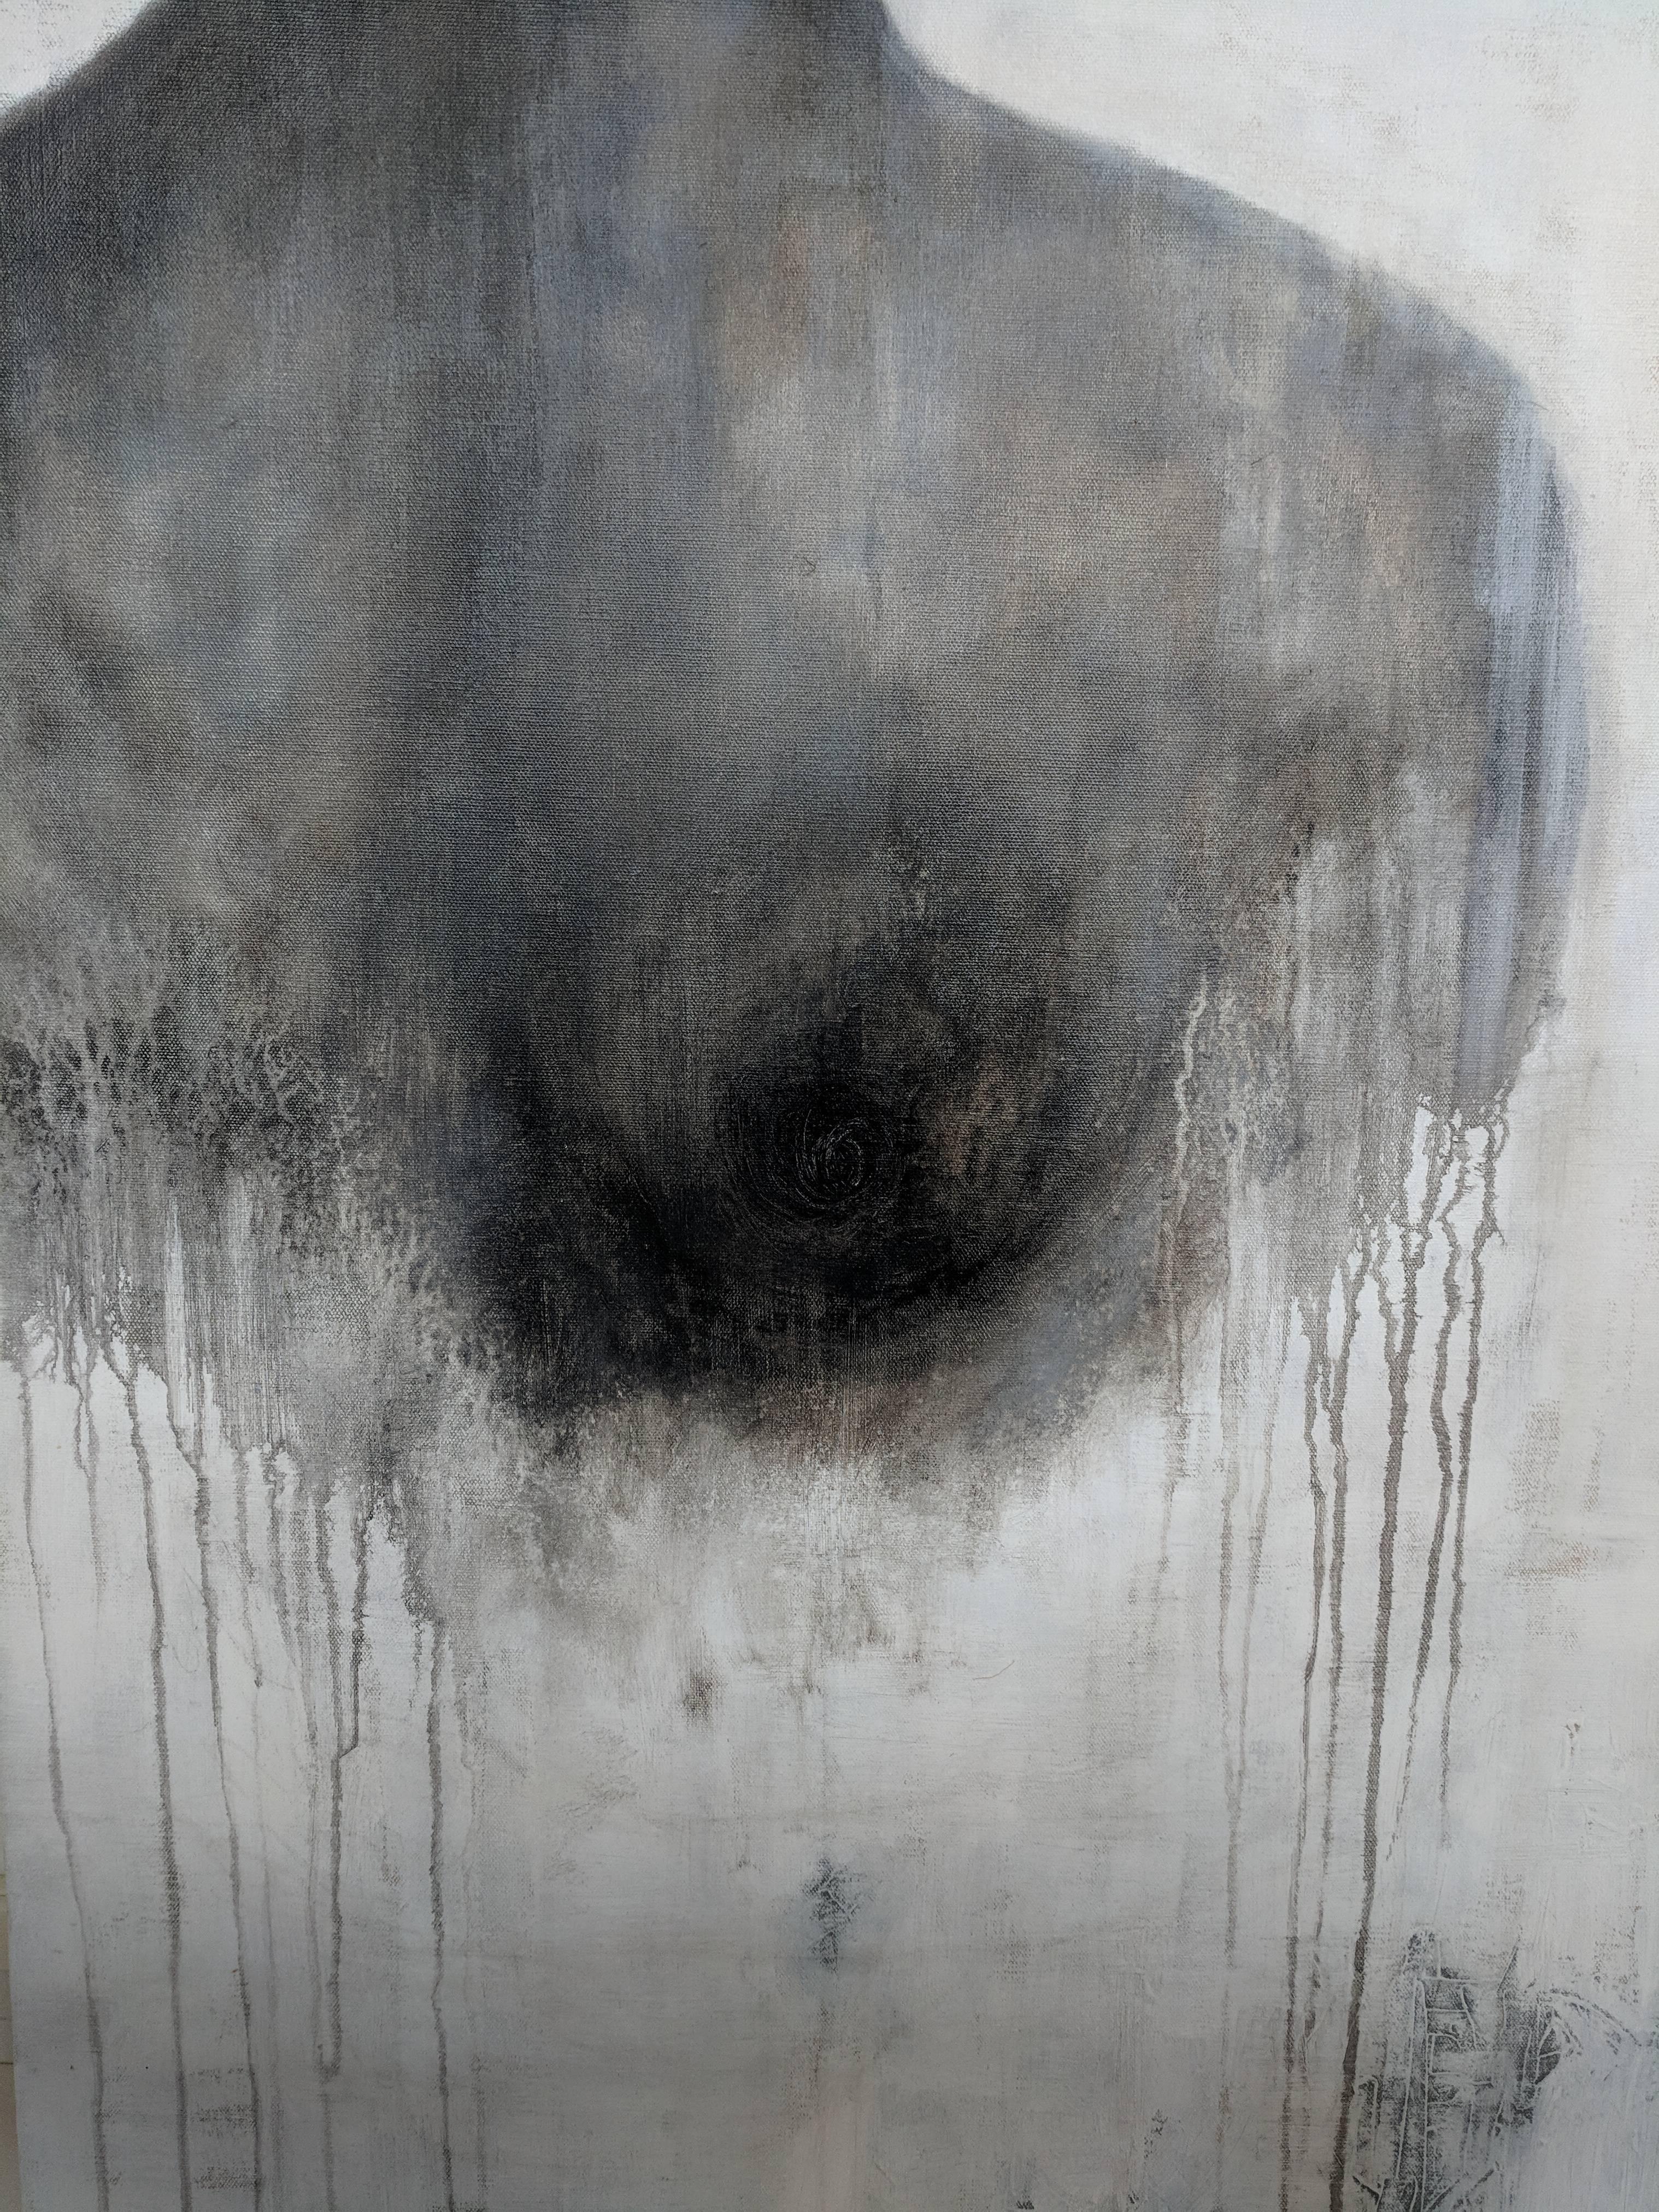 Release, Ashes Series No.2 - Contemporary Mixed Media Art by Sarah Pezdek